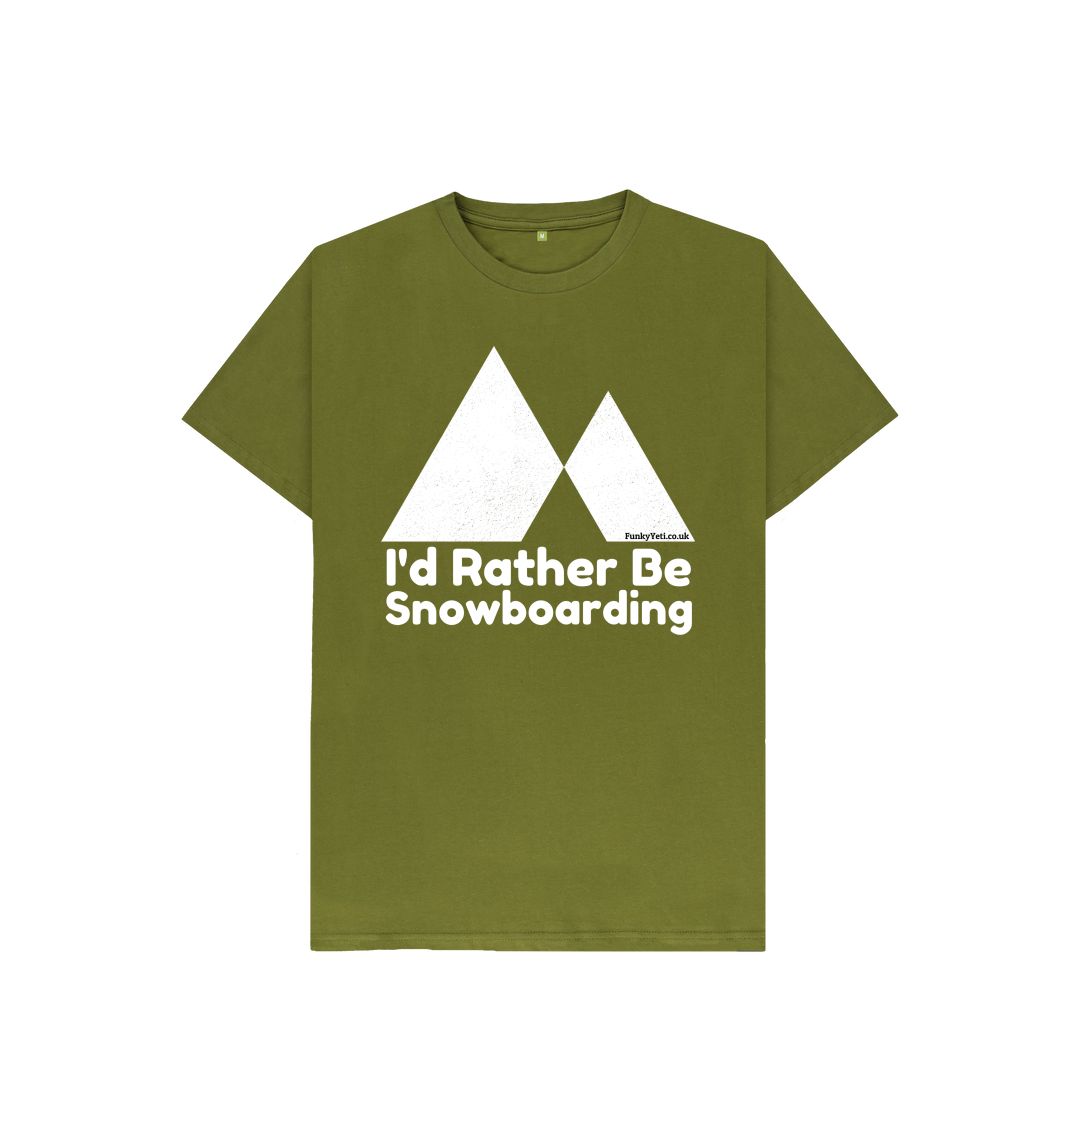 Moss Green Funky Yeti Kids Tee - I'd Rather Be Snowboarding